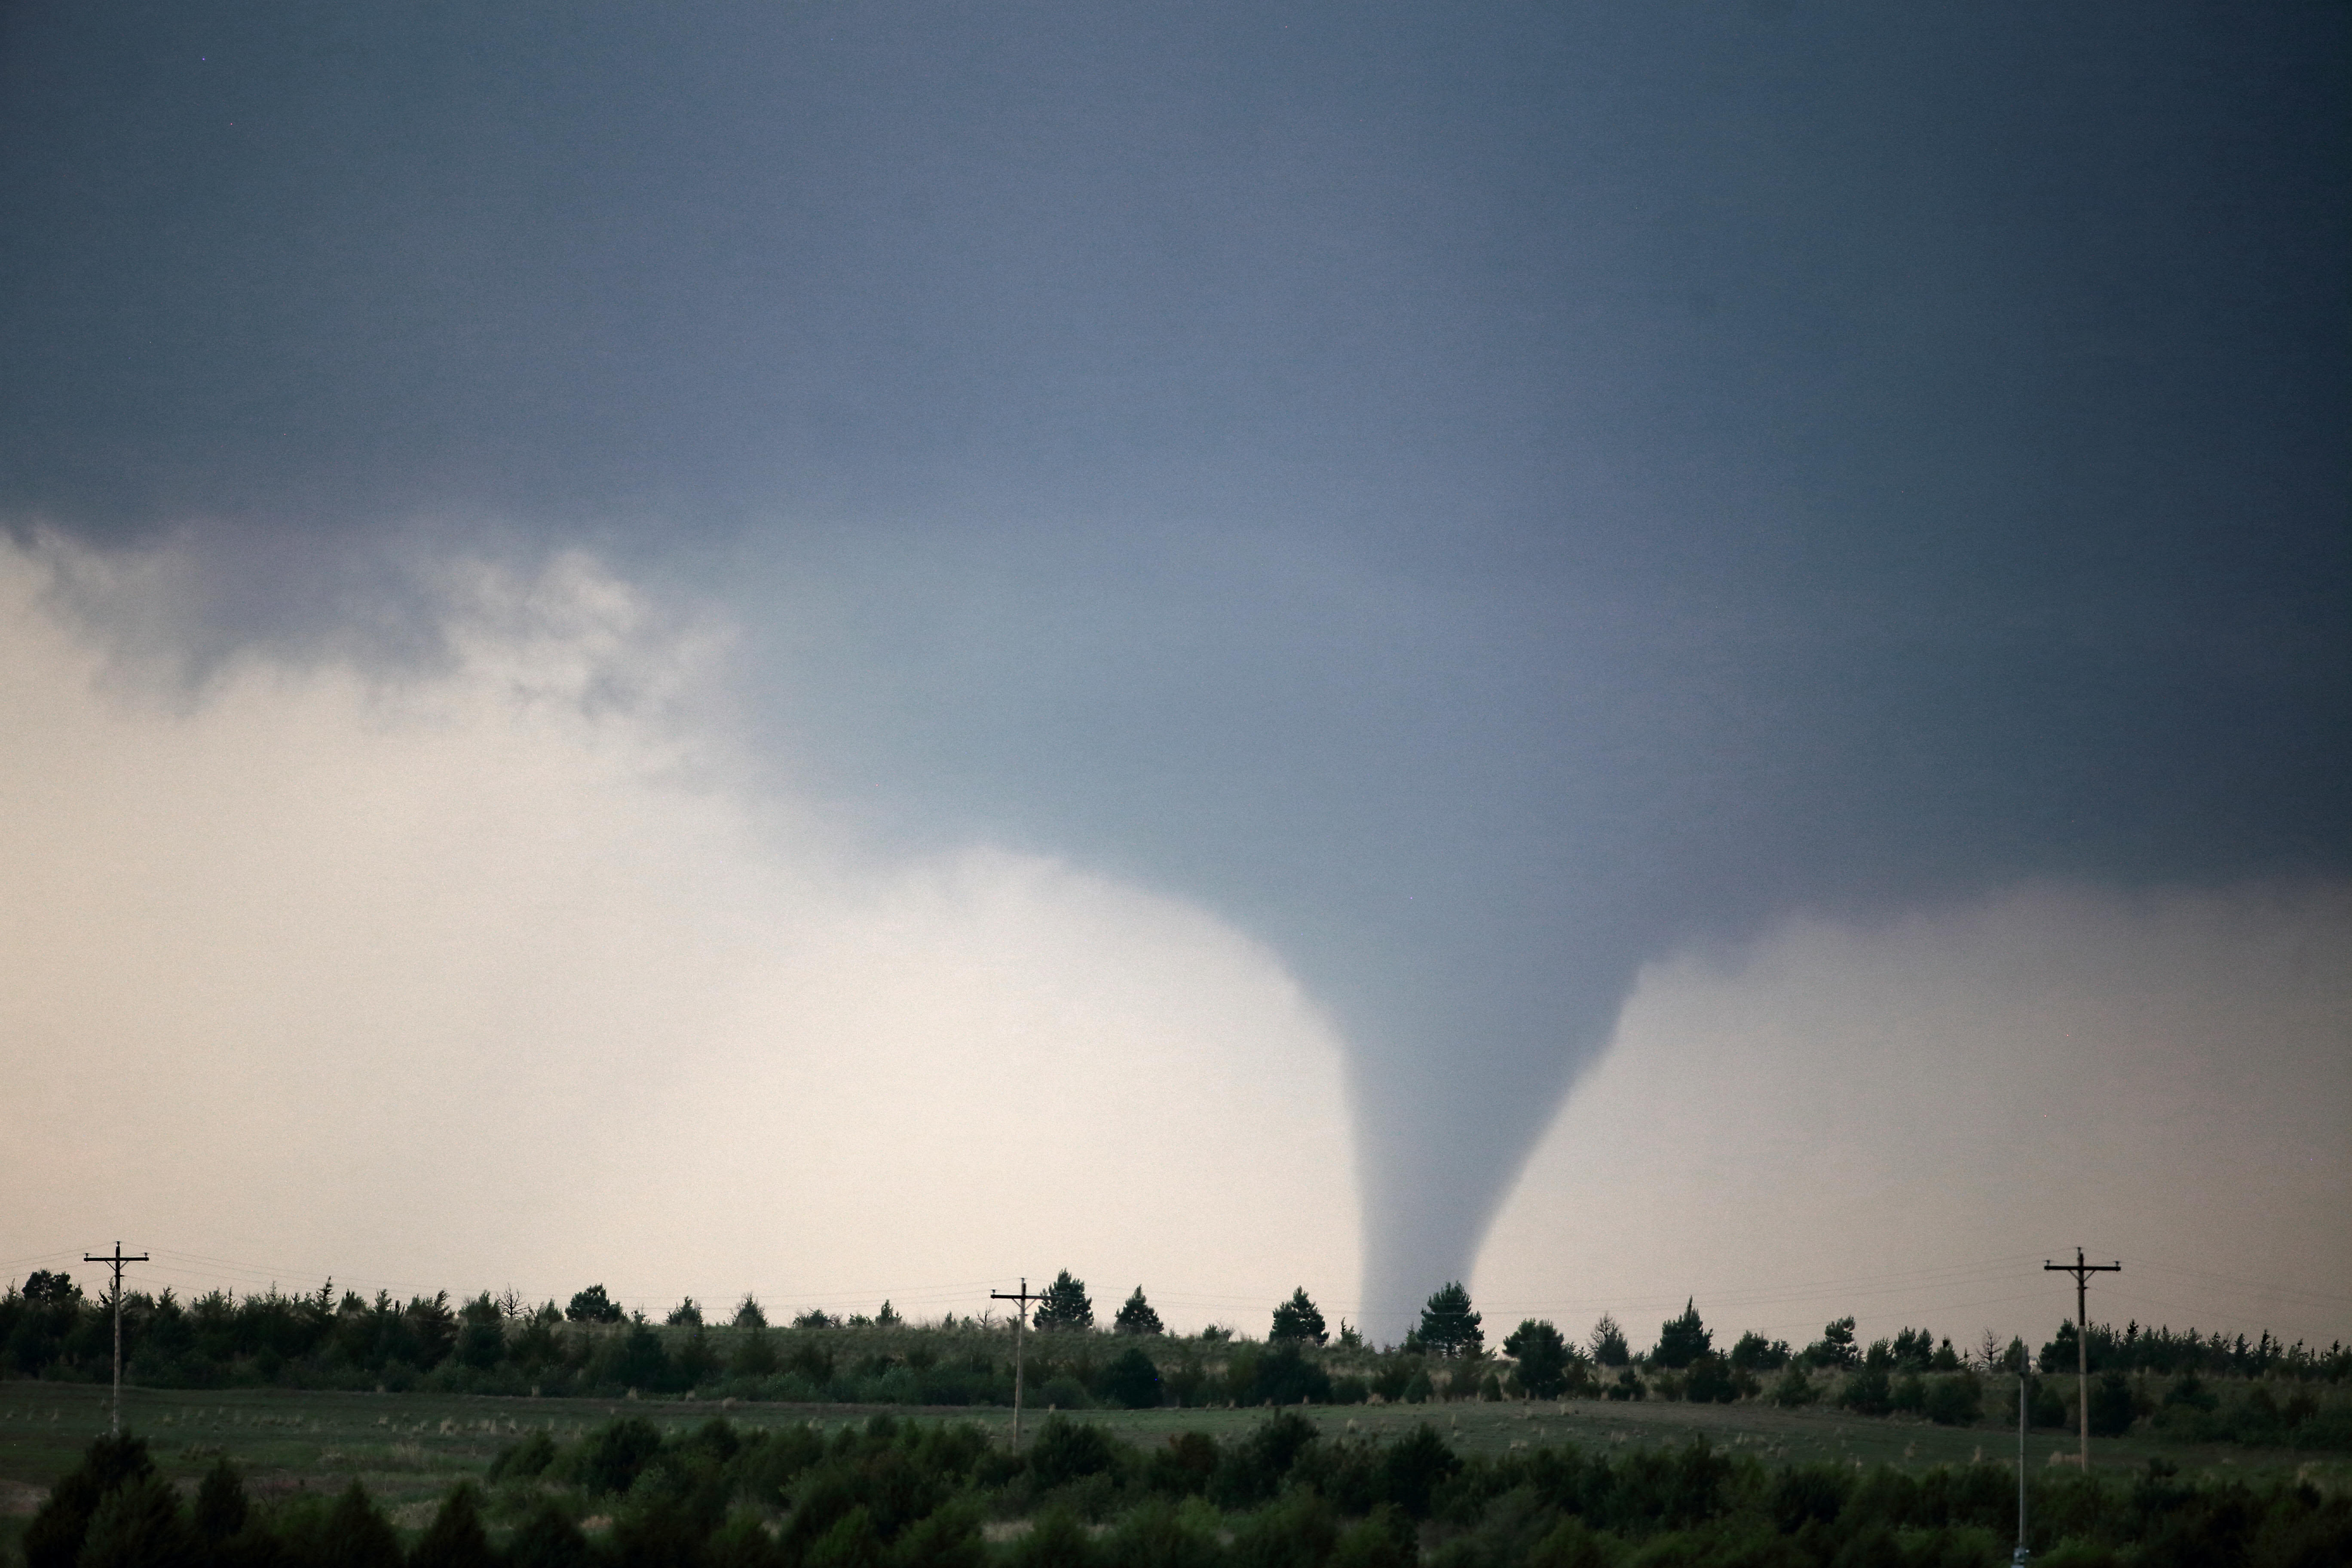 Maps show how "Tornado Alley" has shifted in the U.S.